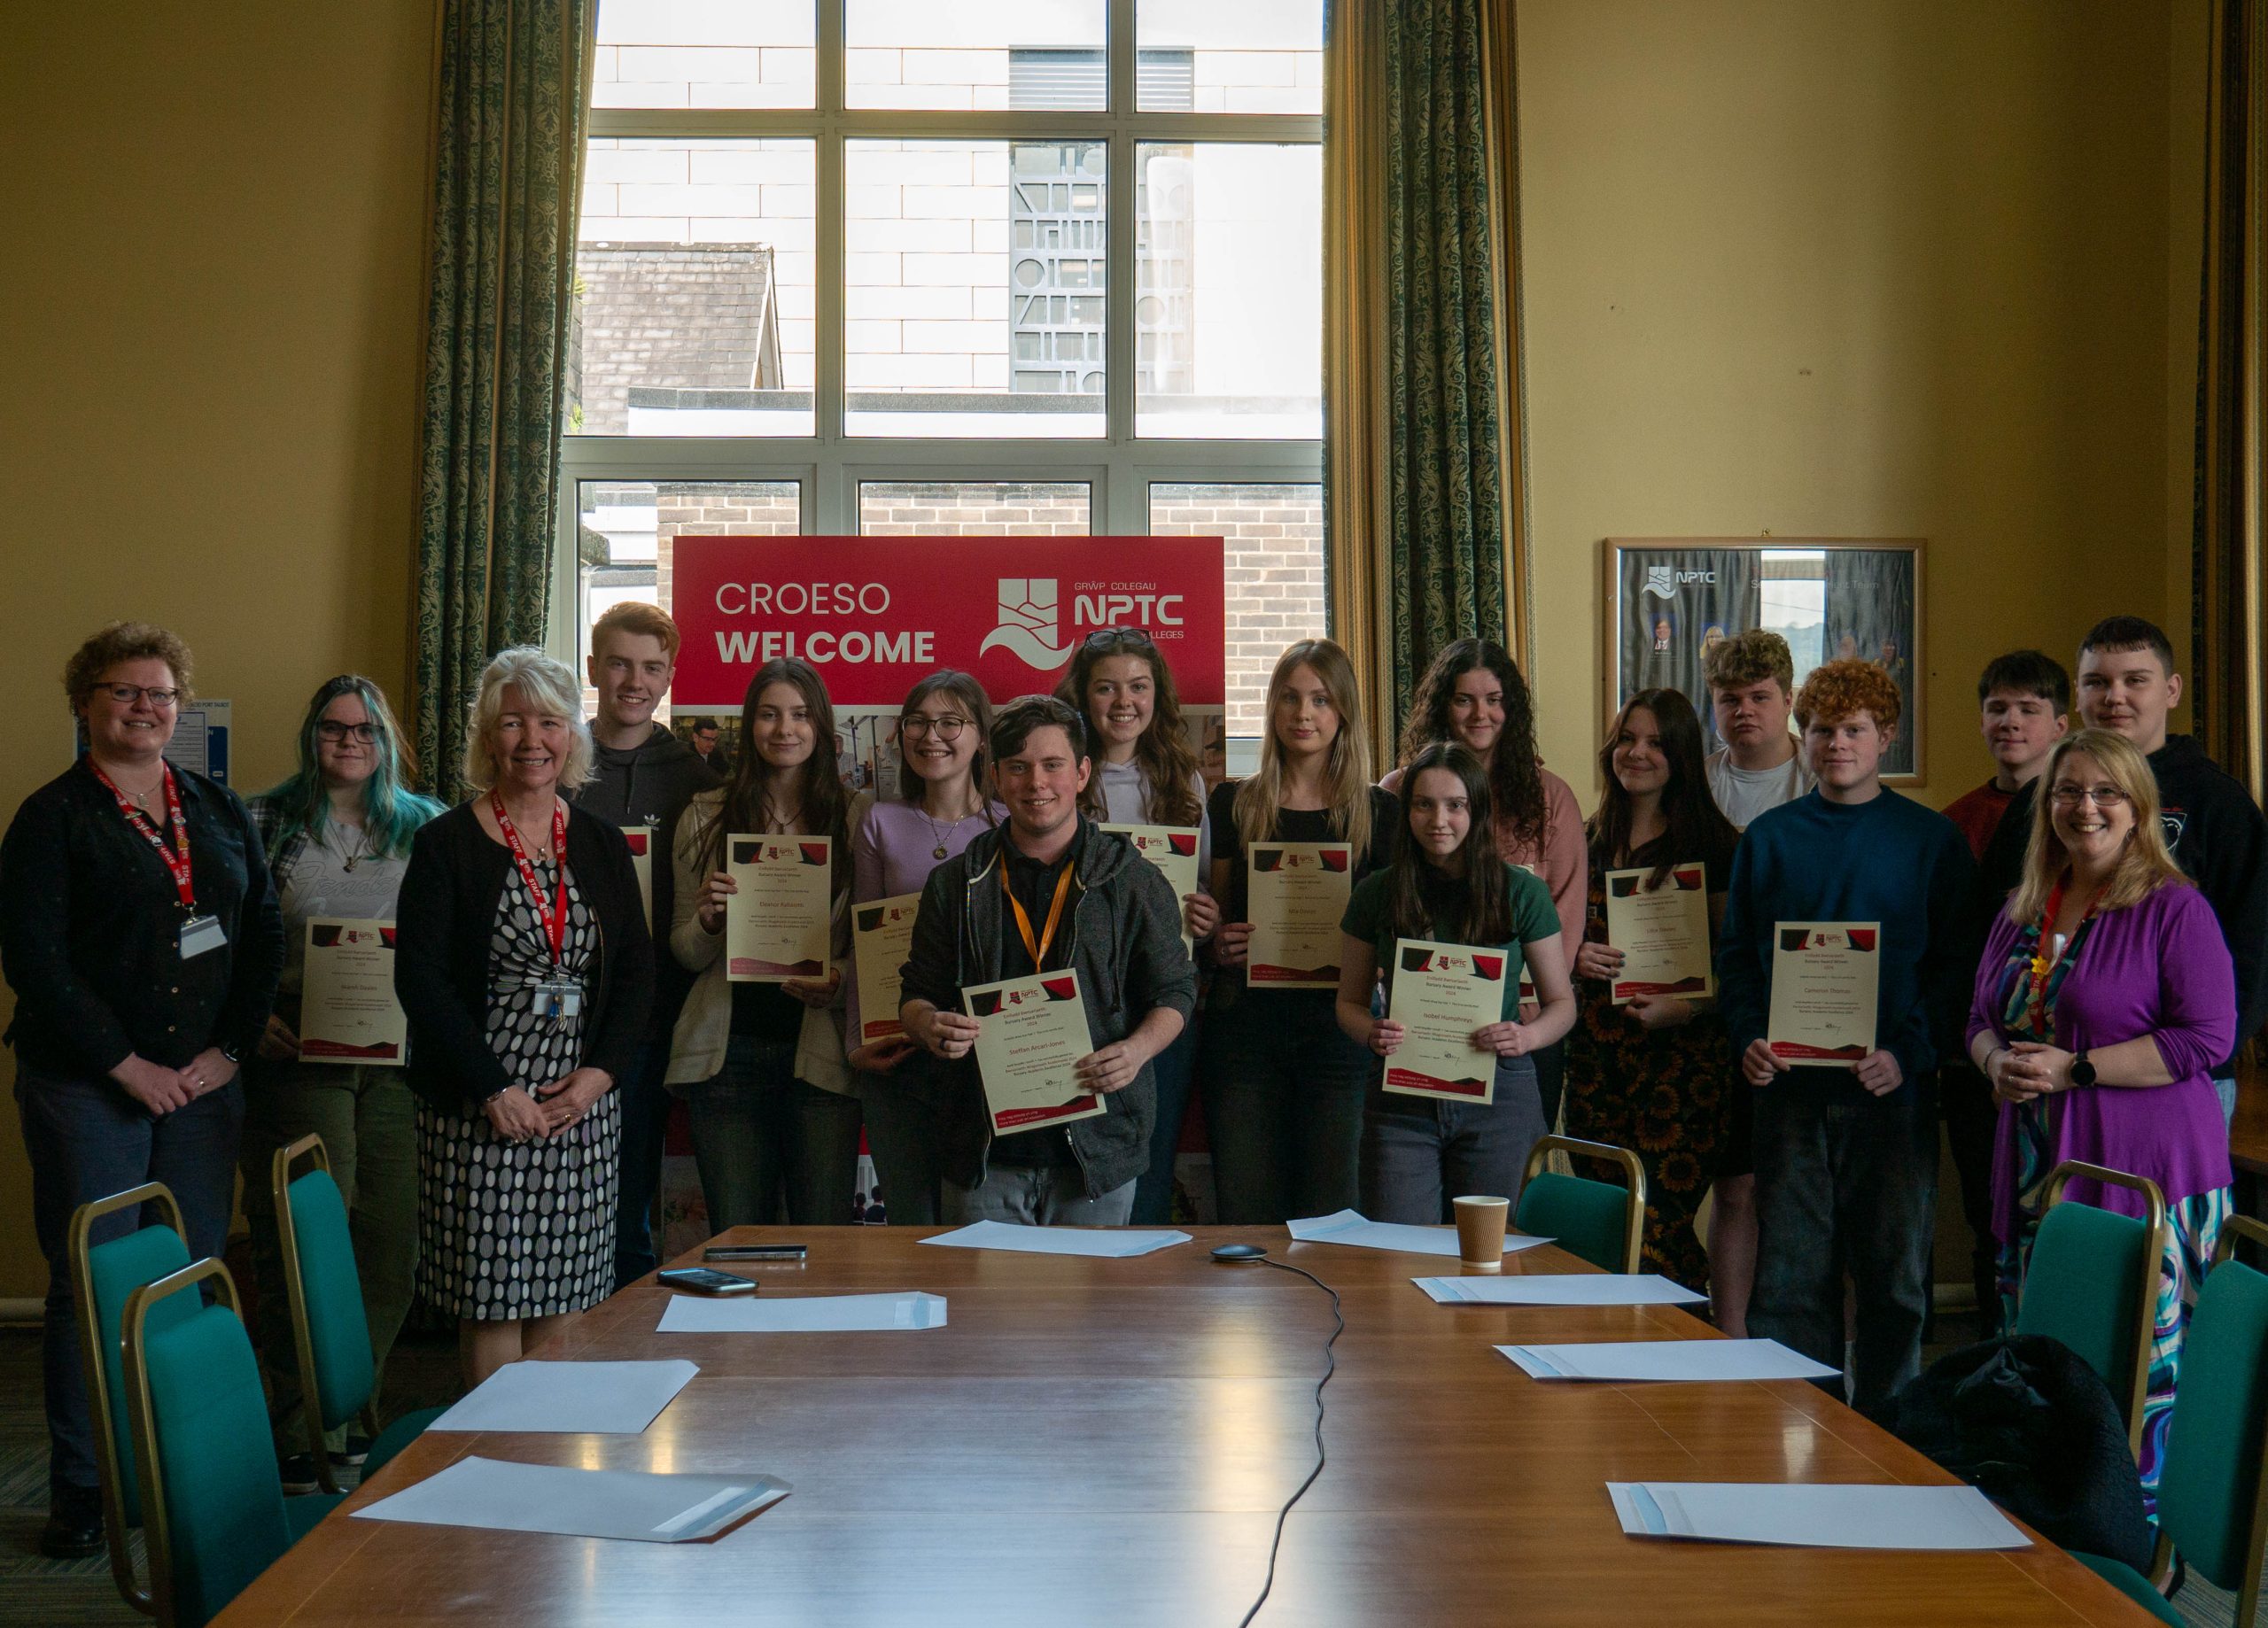 Bursary Award winners in a group with their certificates and members of staff around Boardroom table.